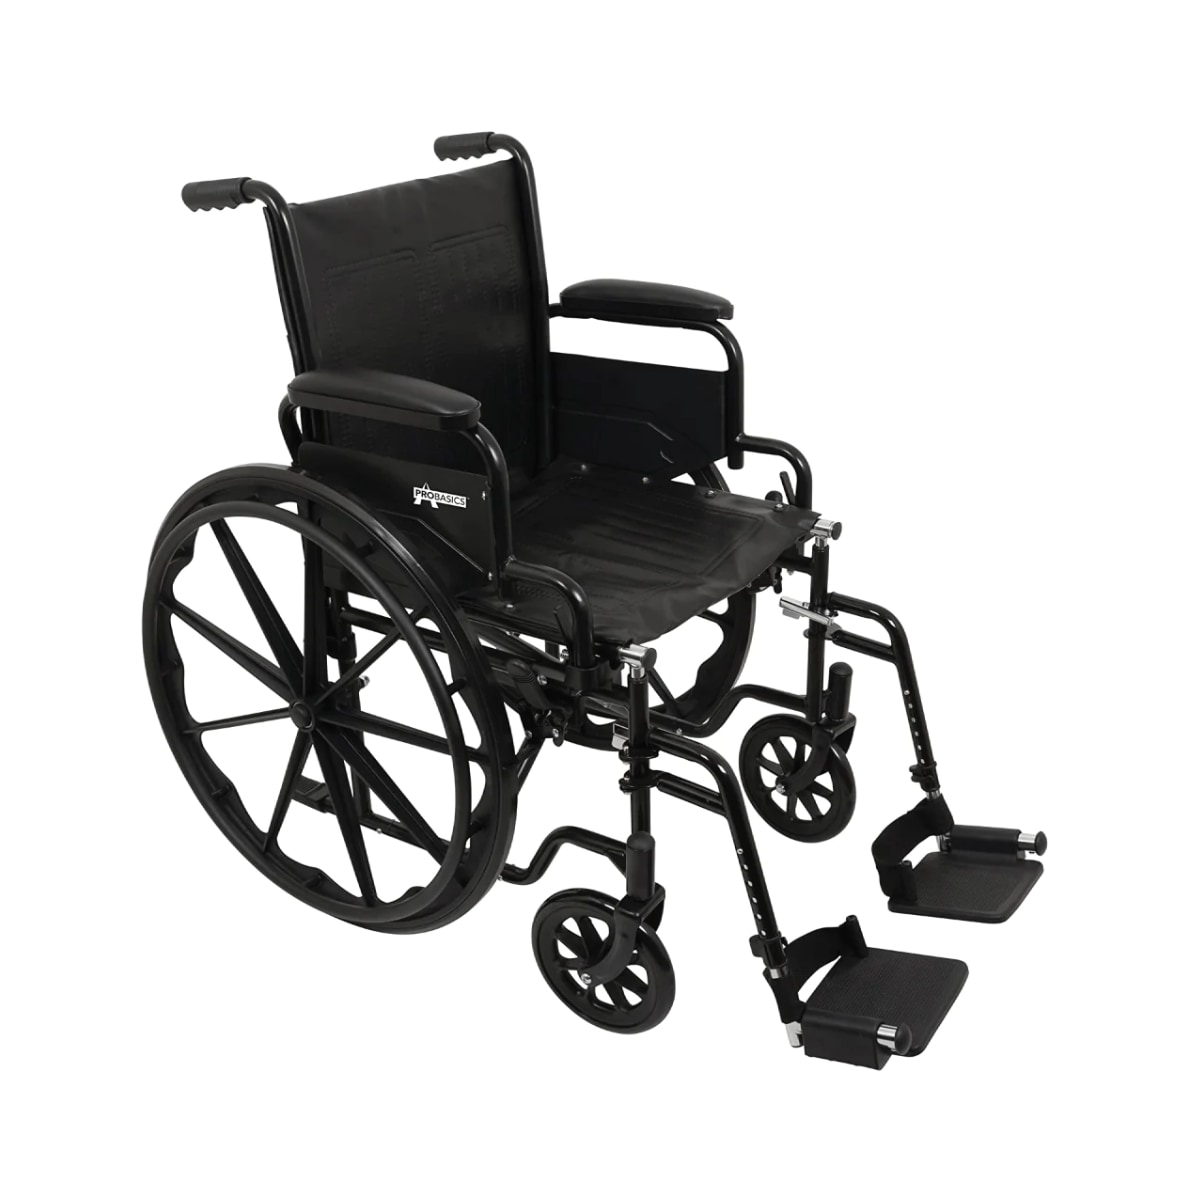 Compass Health Heavy Duty 22" Wheelchair with solid black frame and seat